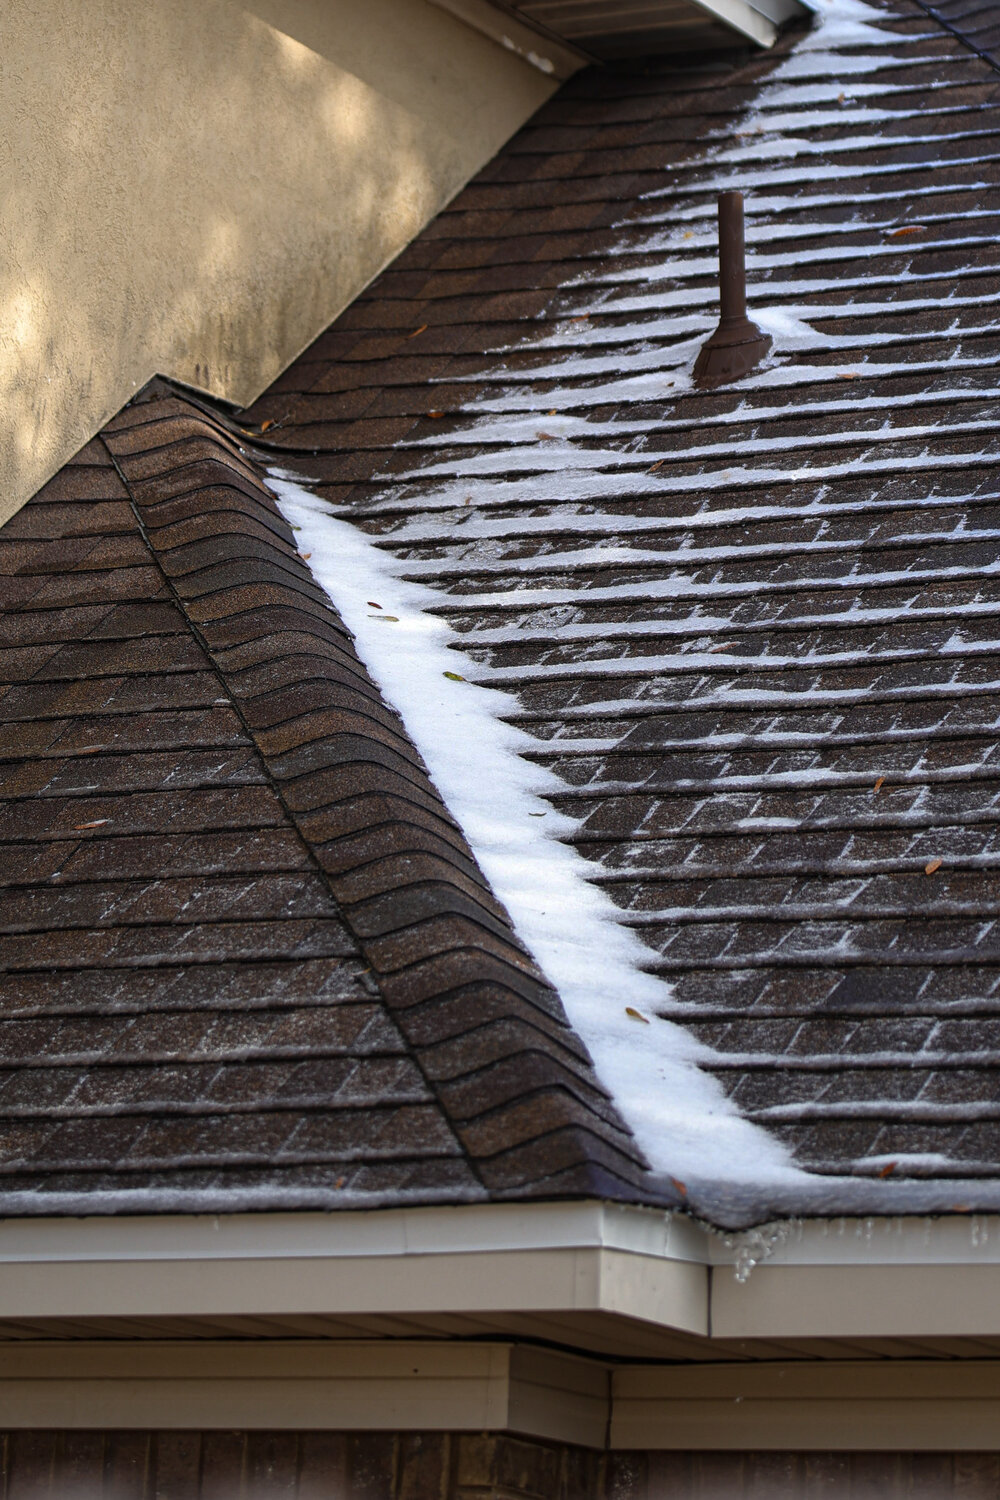 Ice on the roof of a home the morning of Jan. 16.